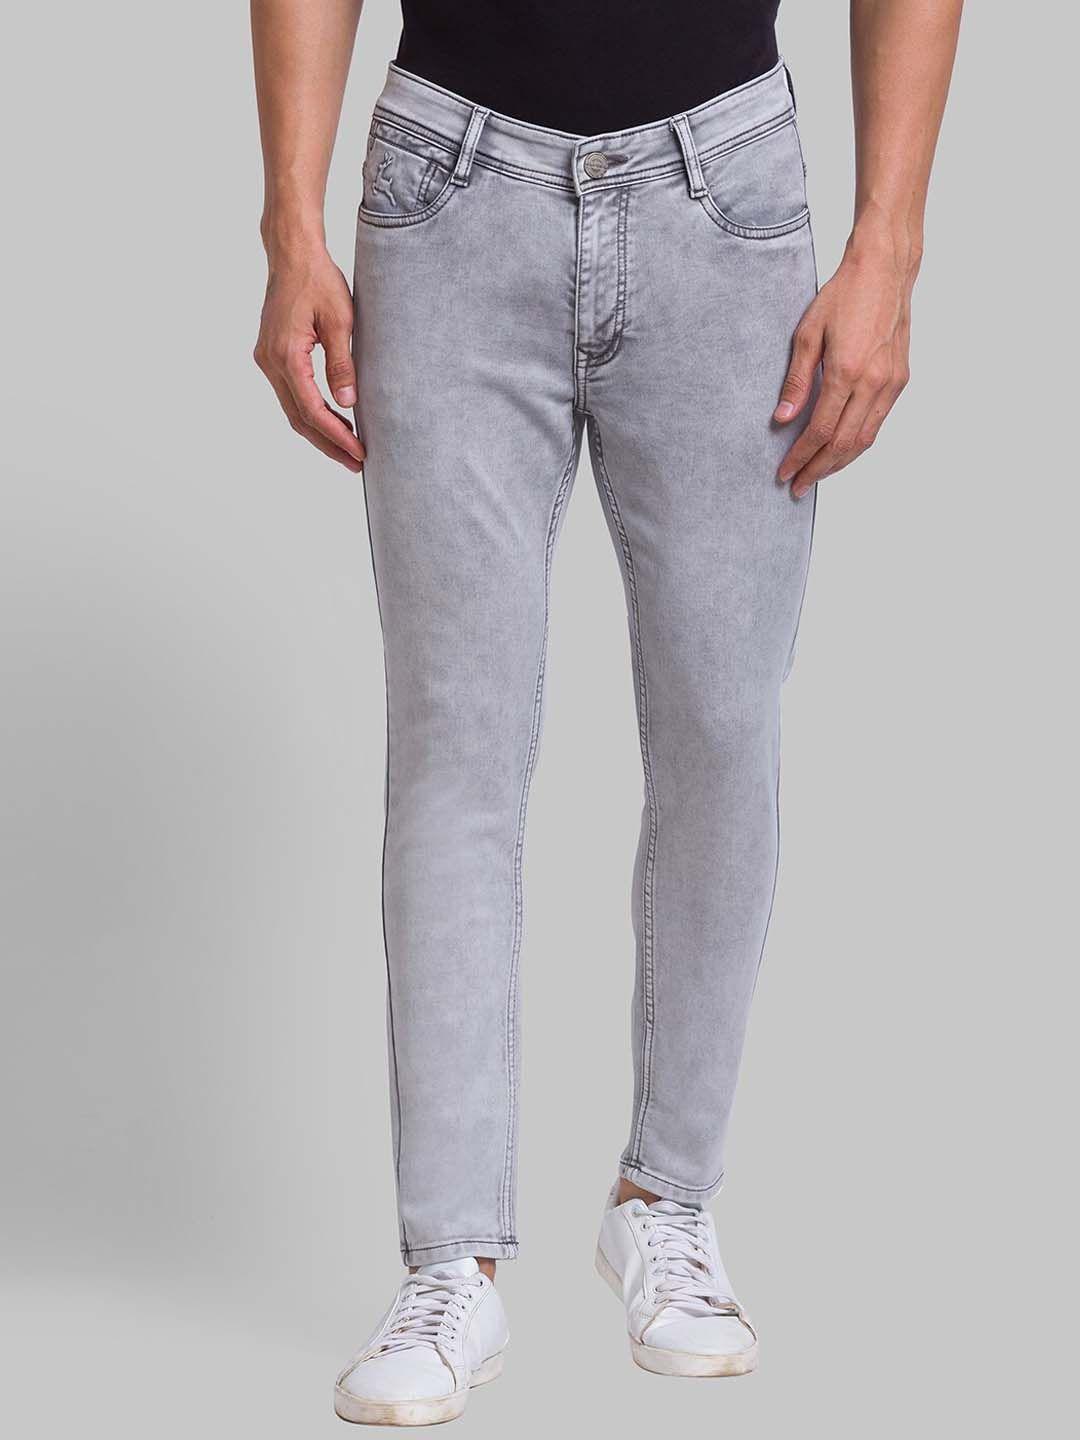 parx men grey tapered fit heavy fade jeans